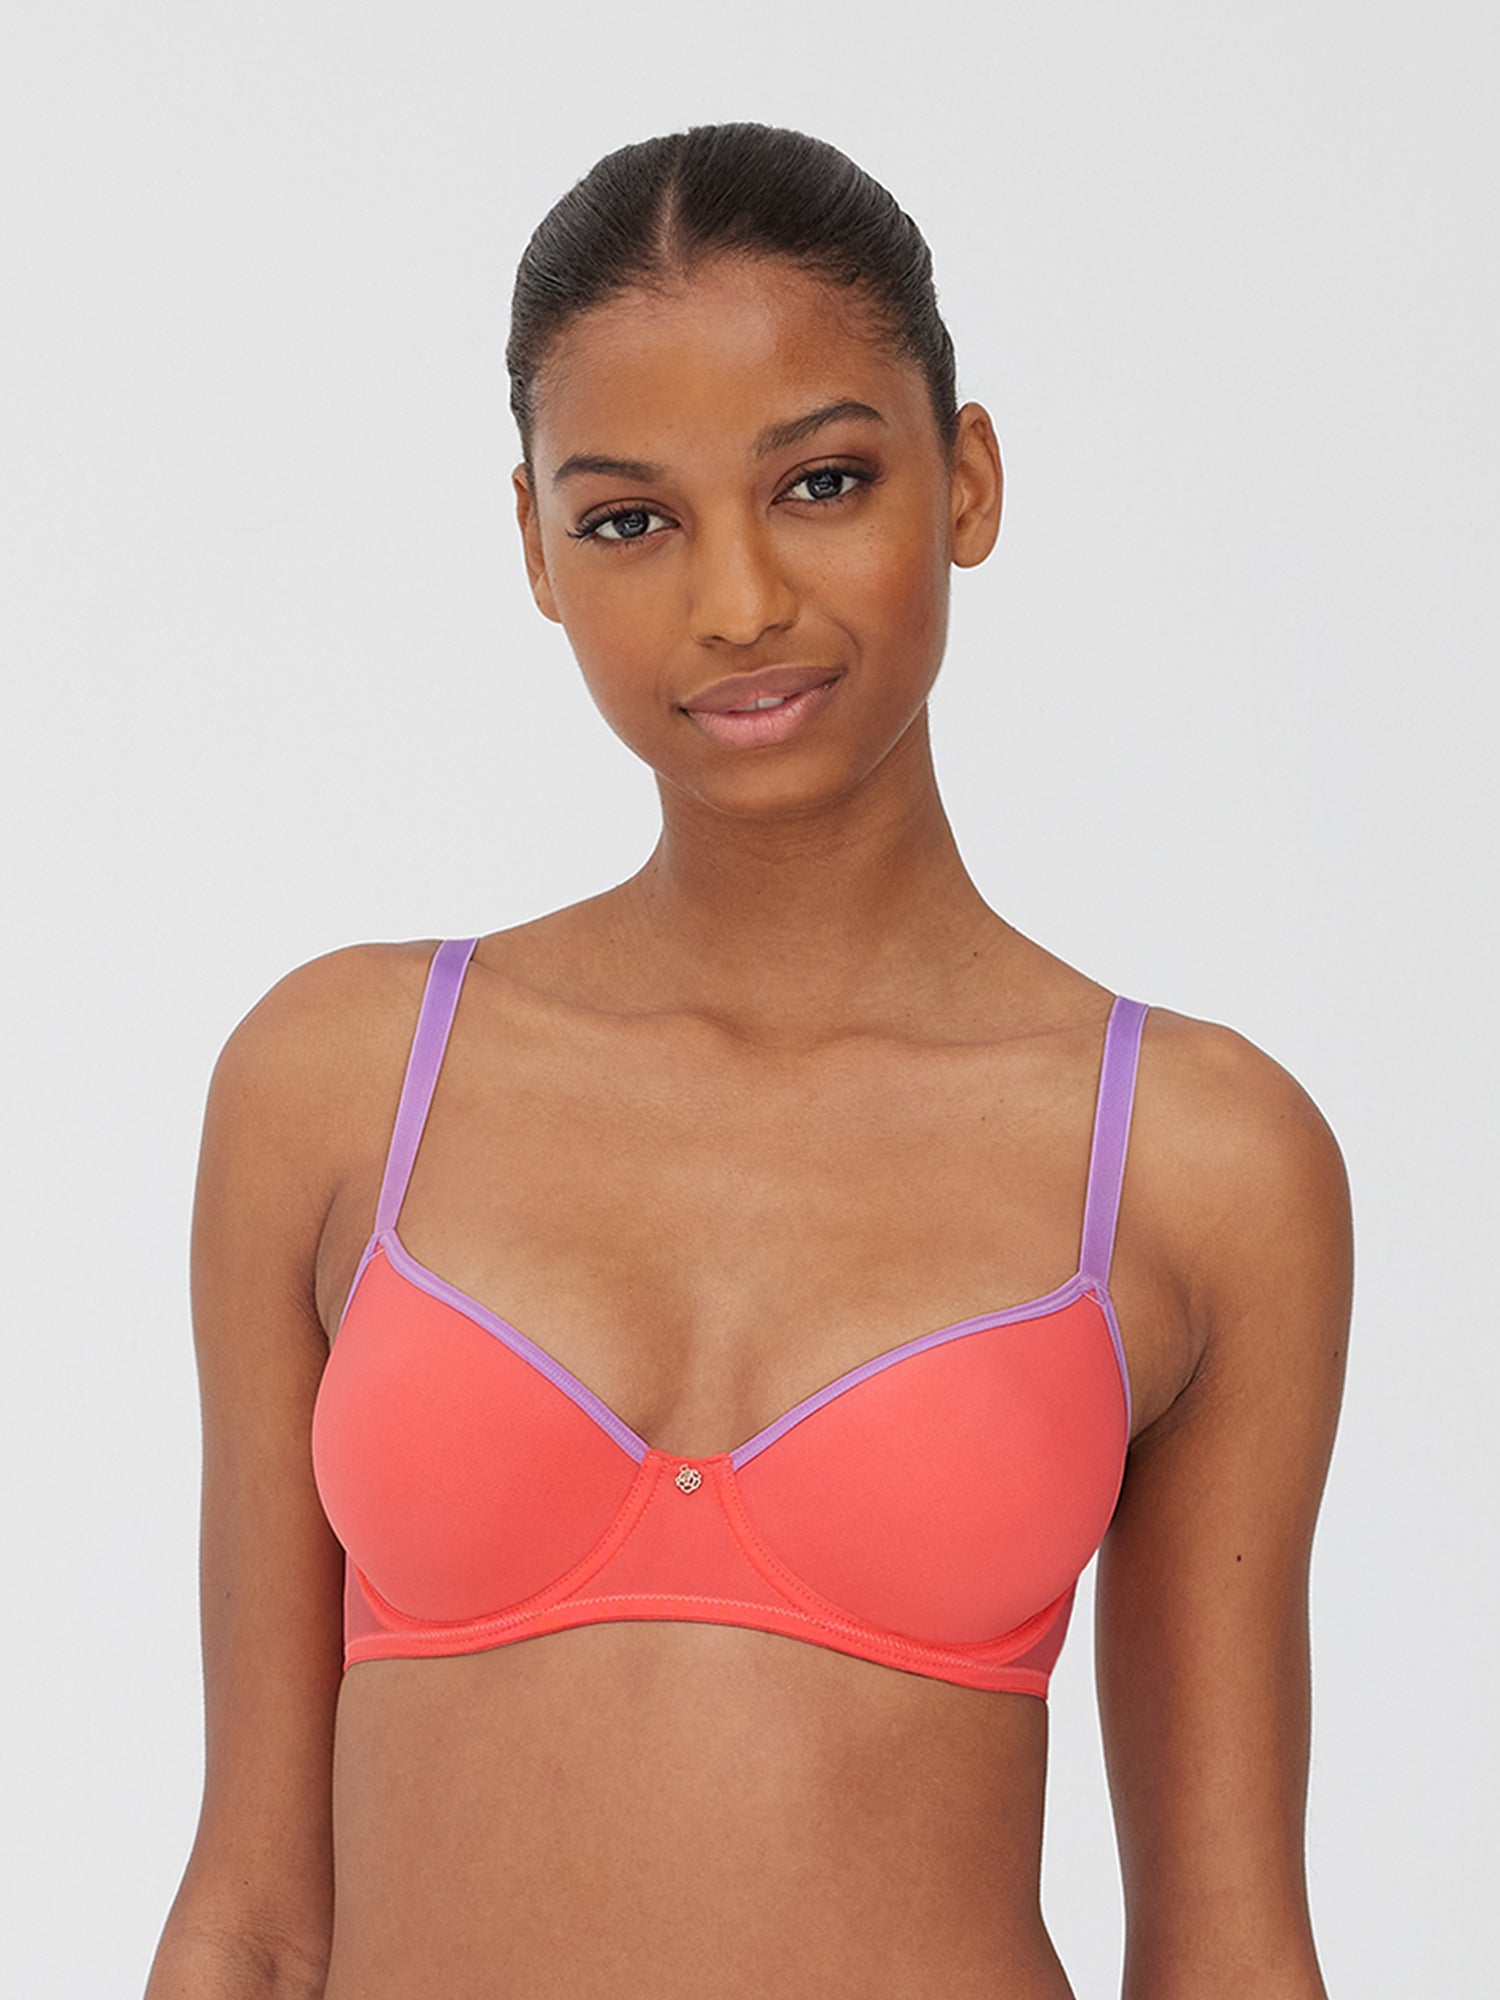 SALIA GIRL Soft Padded Bras for Girls & Teens 12-14, No Wires